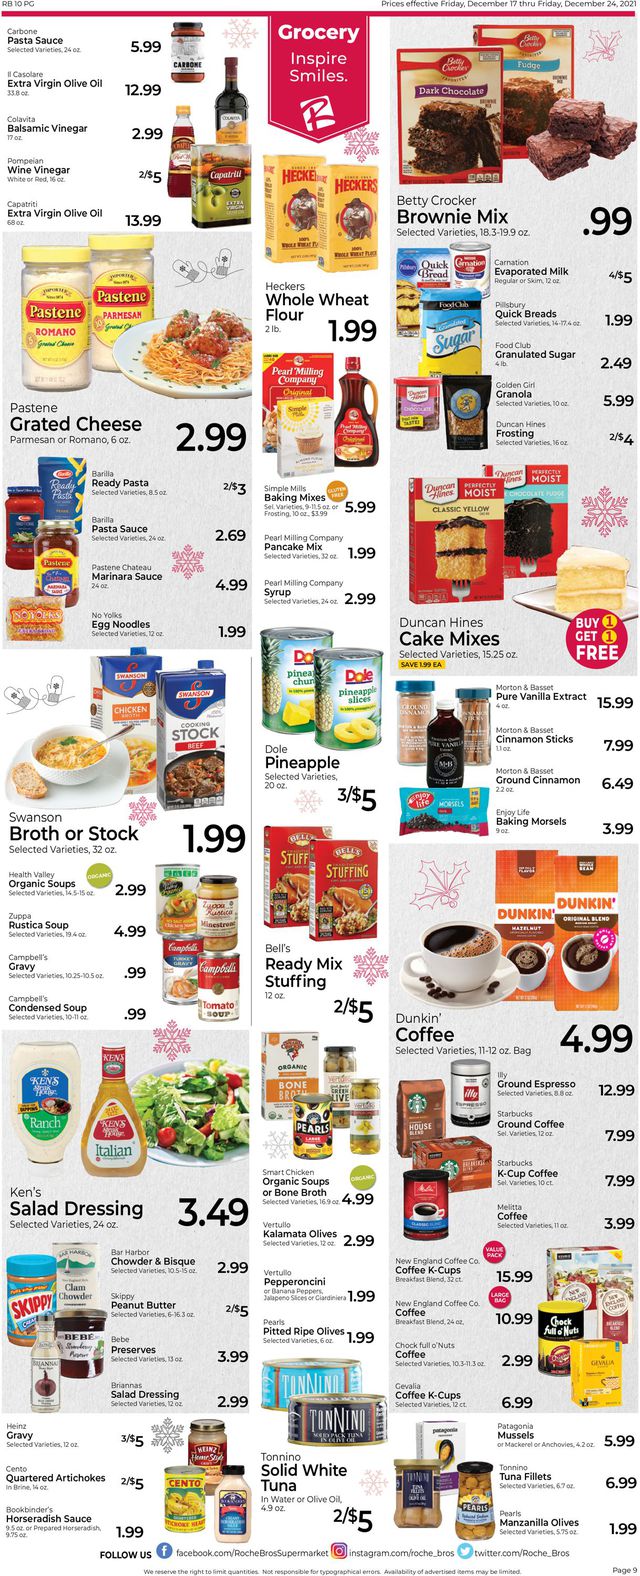 Roche Bros. Supermarkets Ad from 12/17/2021